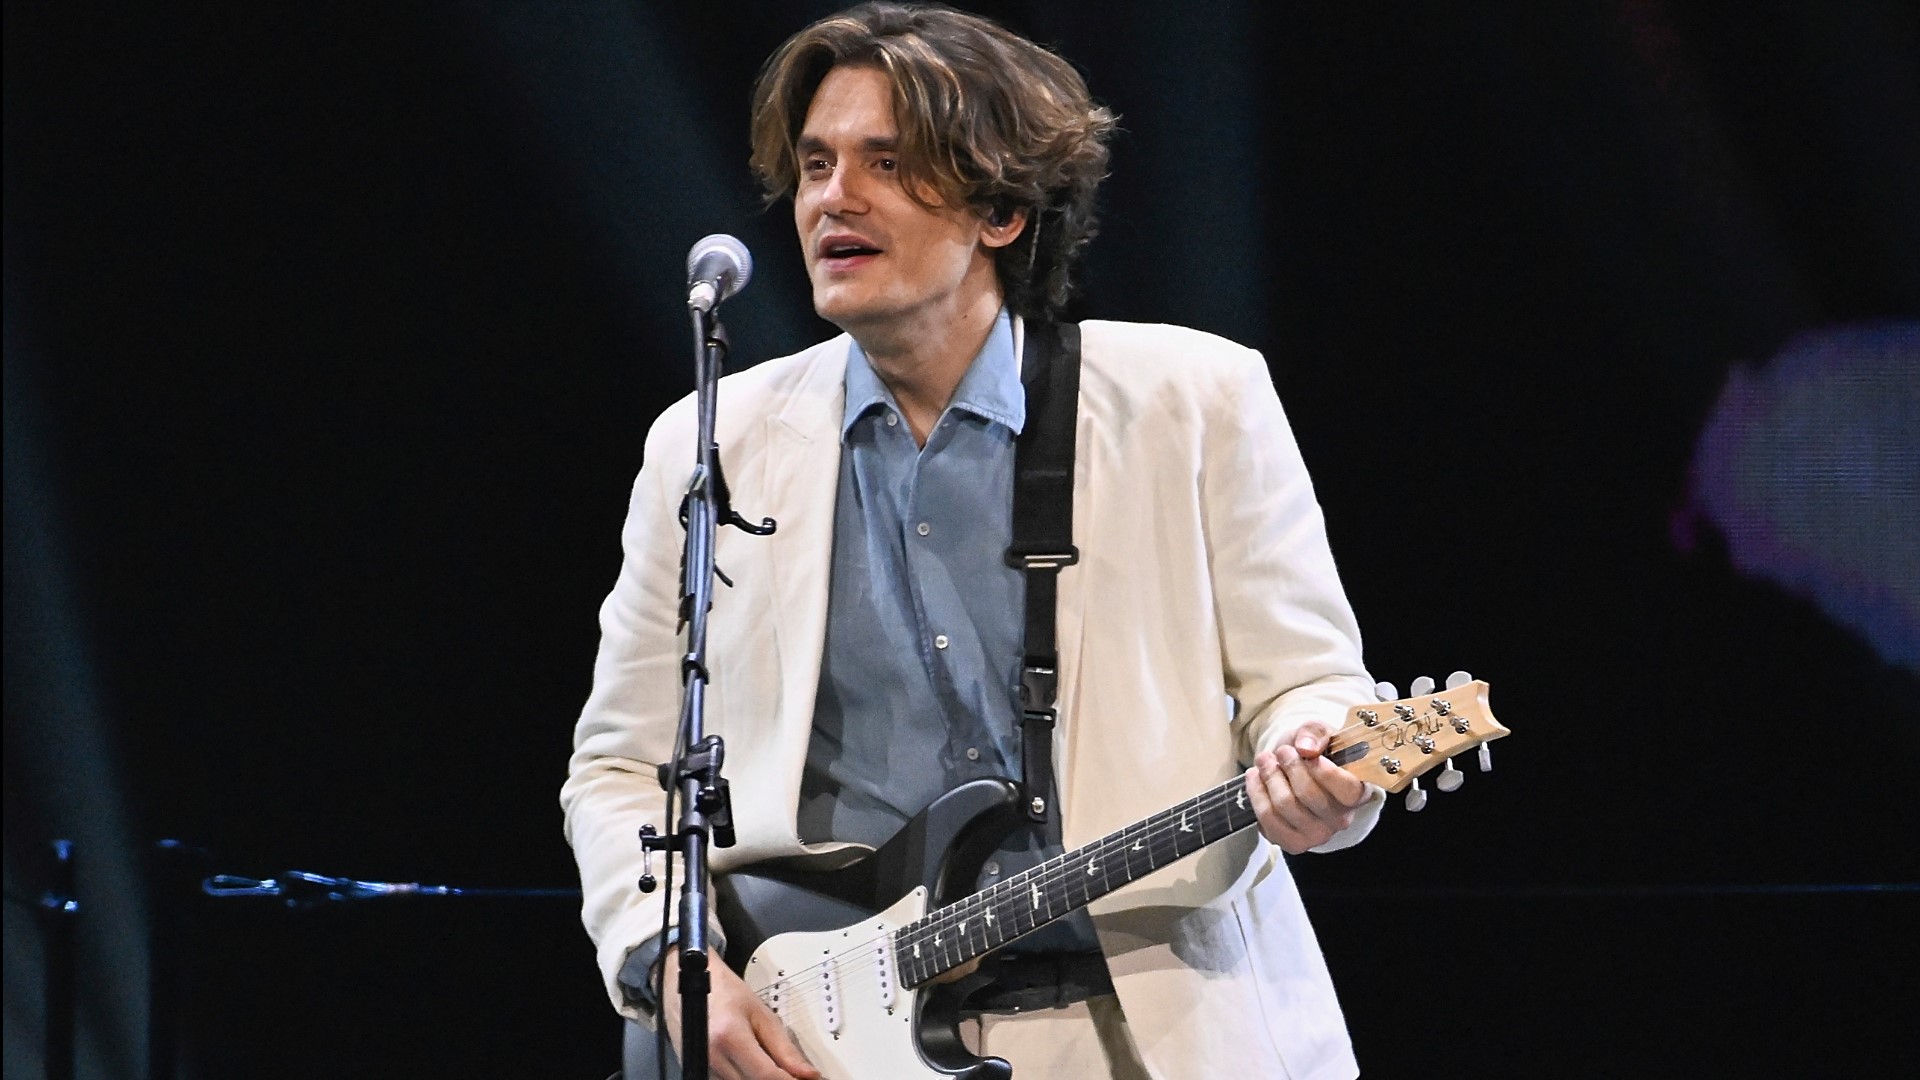 John Mayer in Tampa Tickets to the April 5 Amalie Arena show